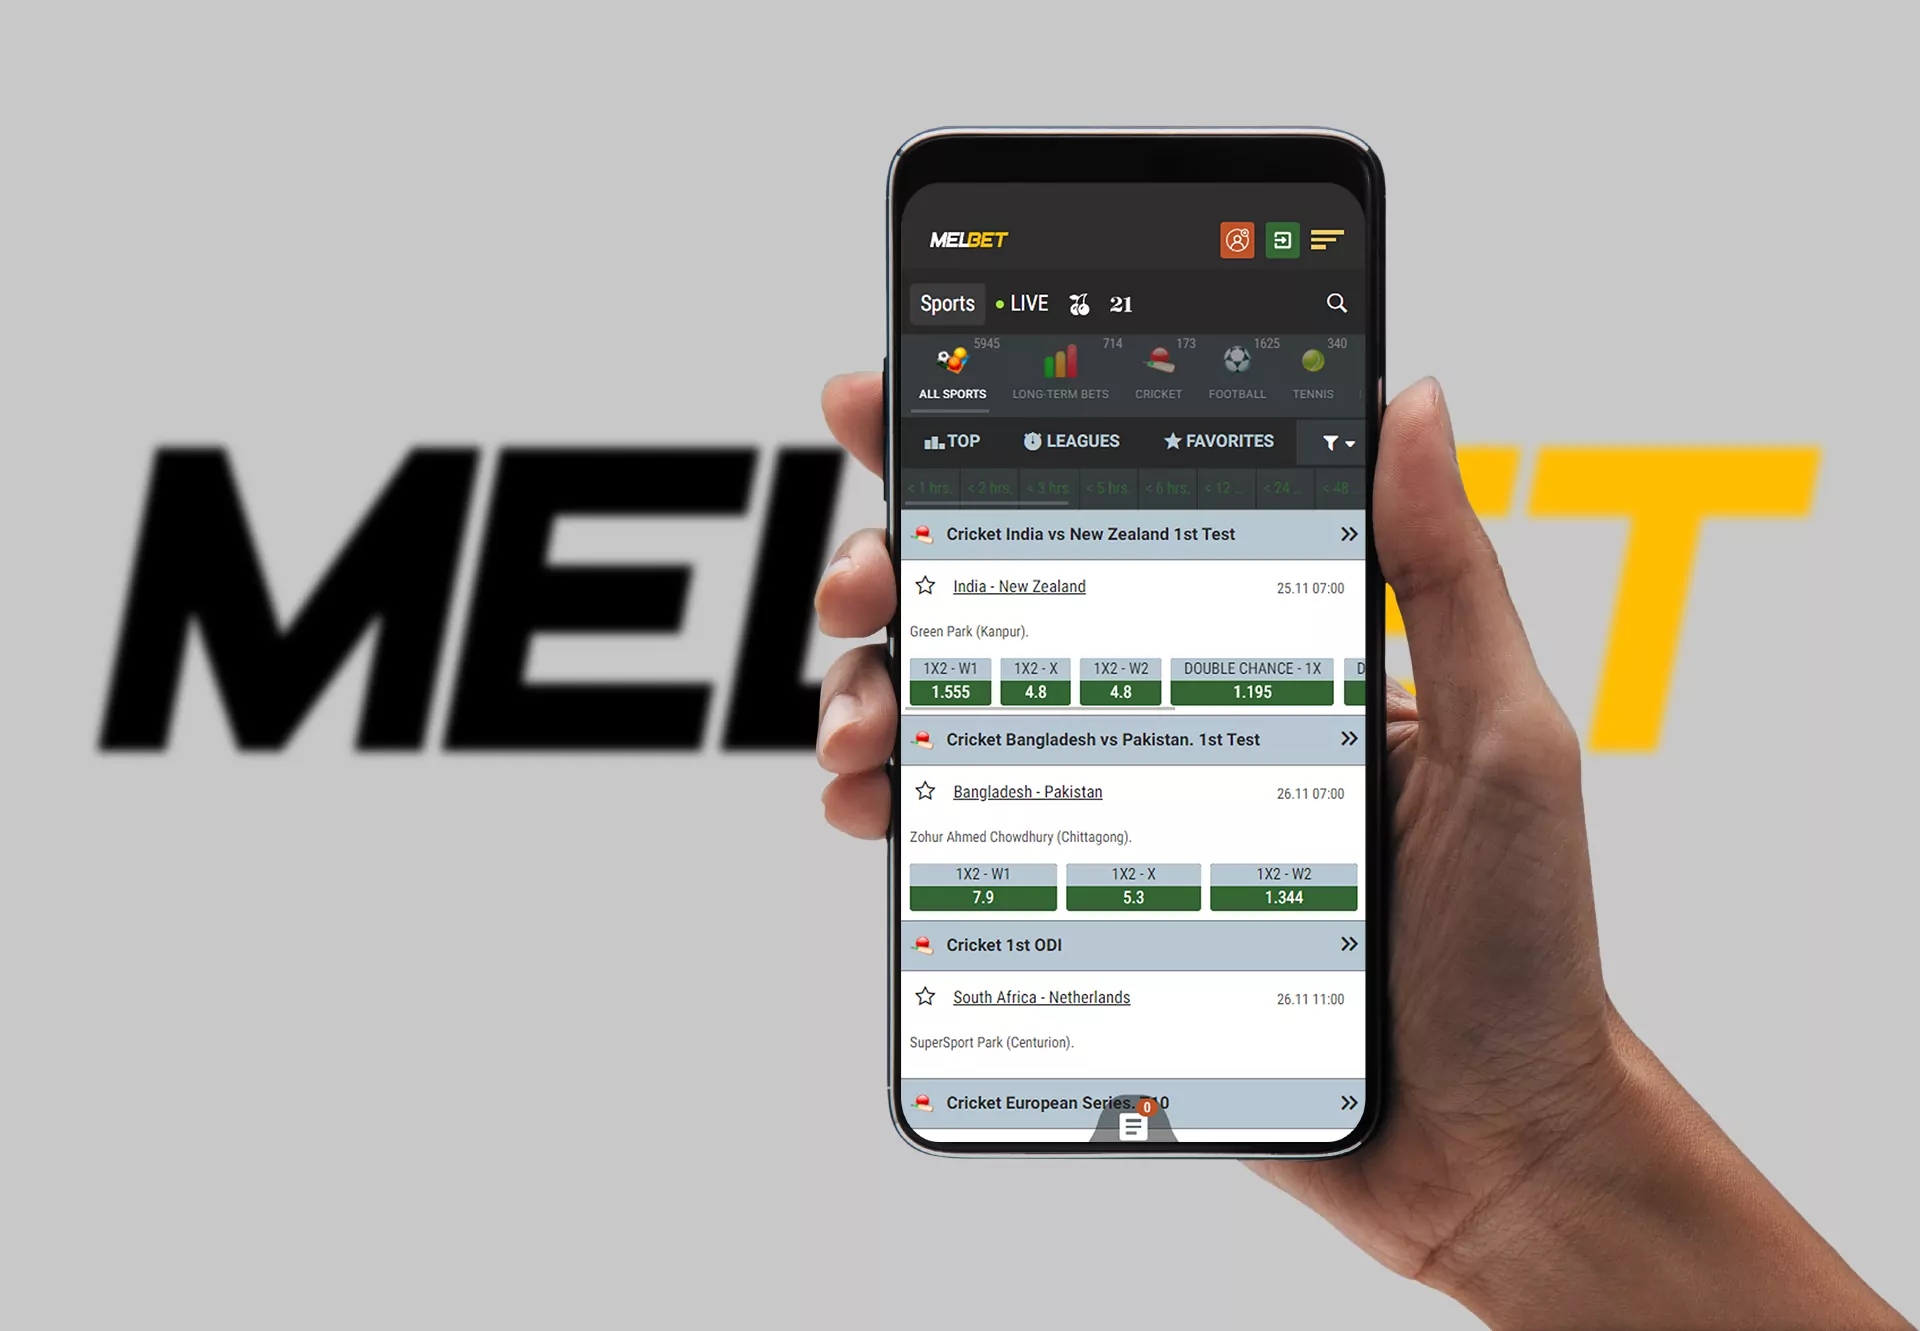 You can get a 130% bonus on your first deposit if you top up your account in the Melbet app.